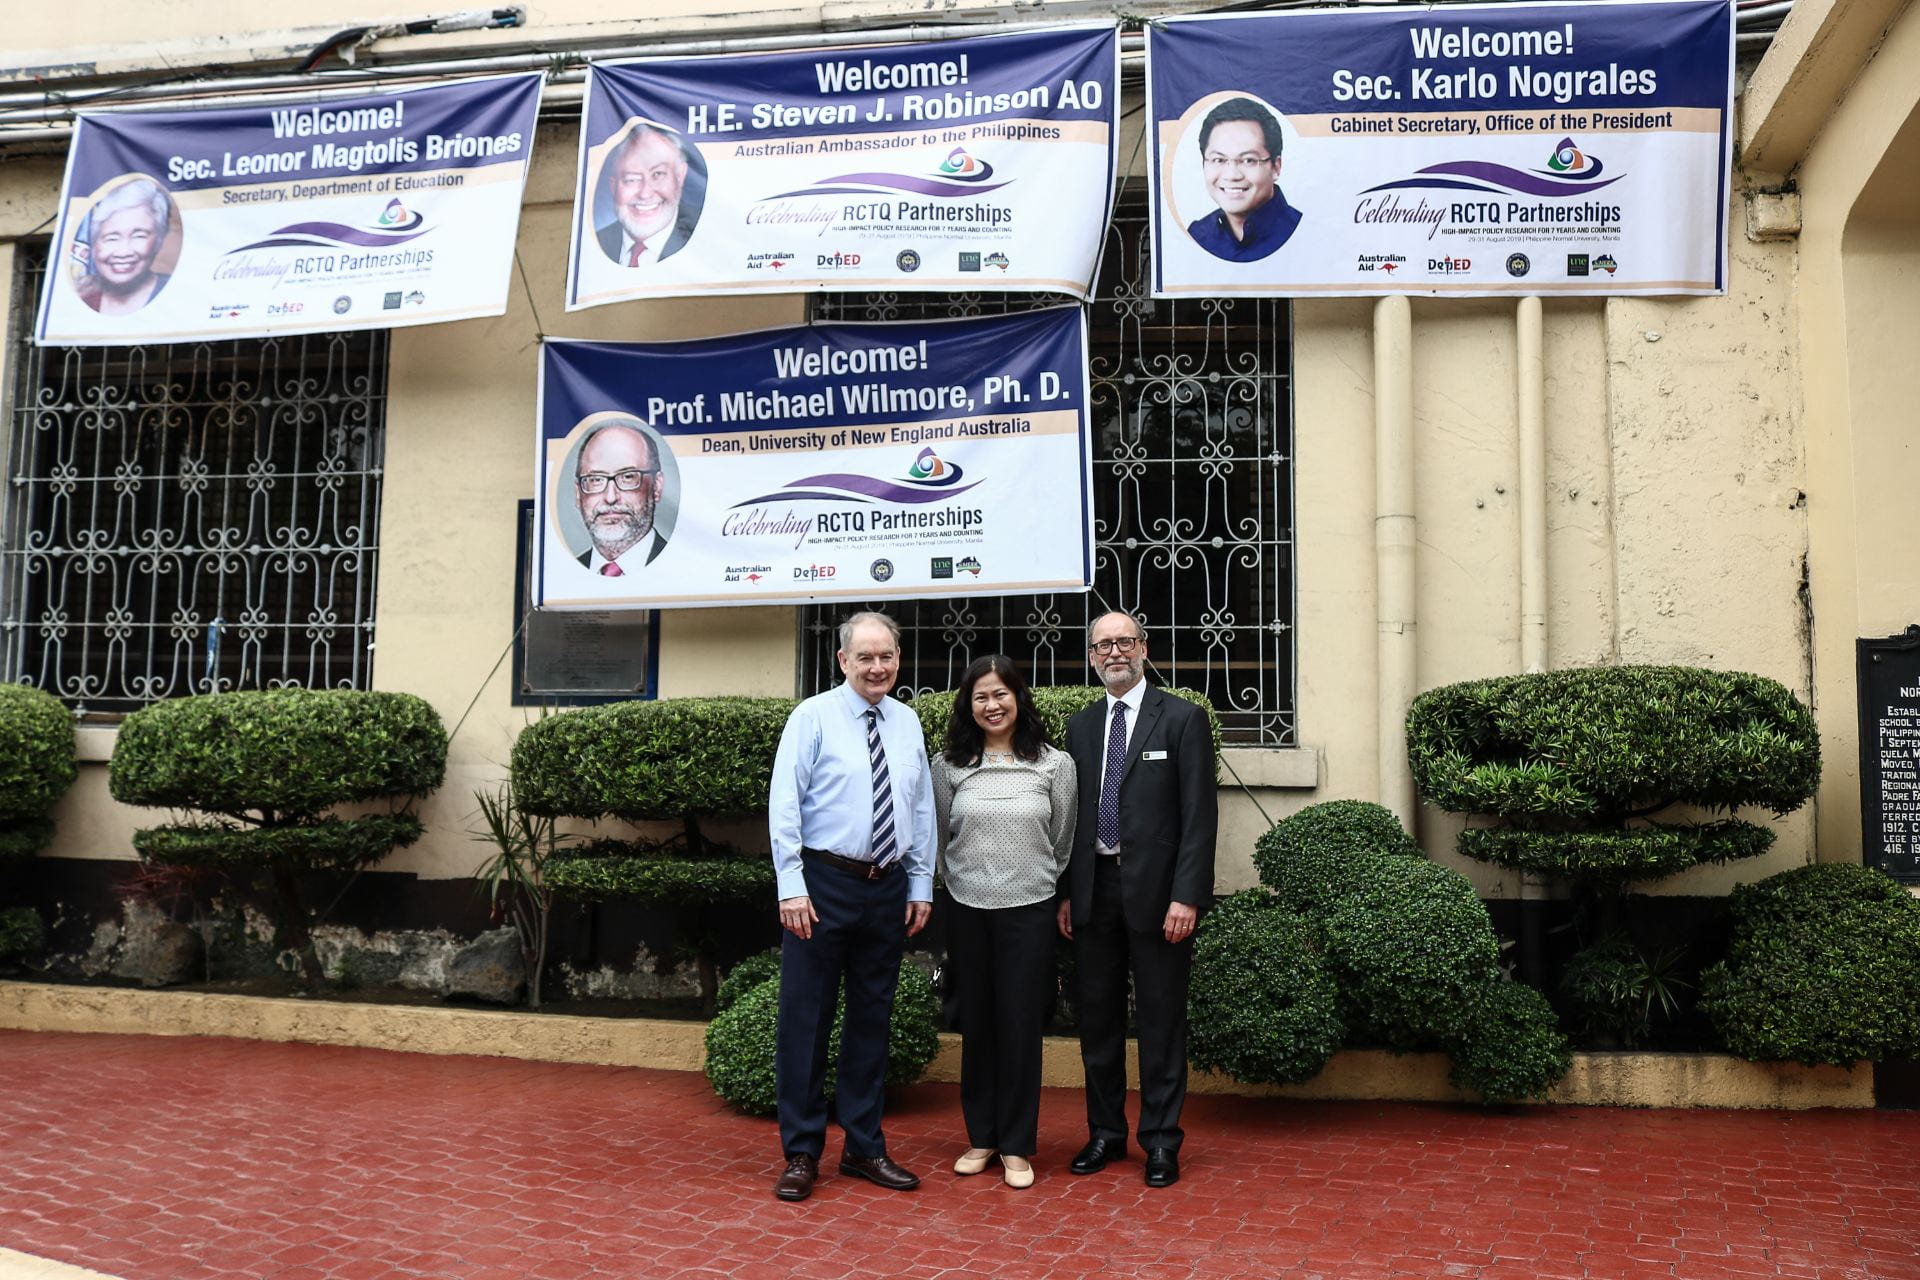 School of Education delegates are welcomes with banners in the Philippines.